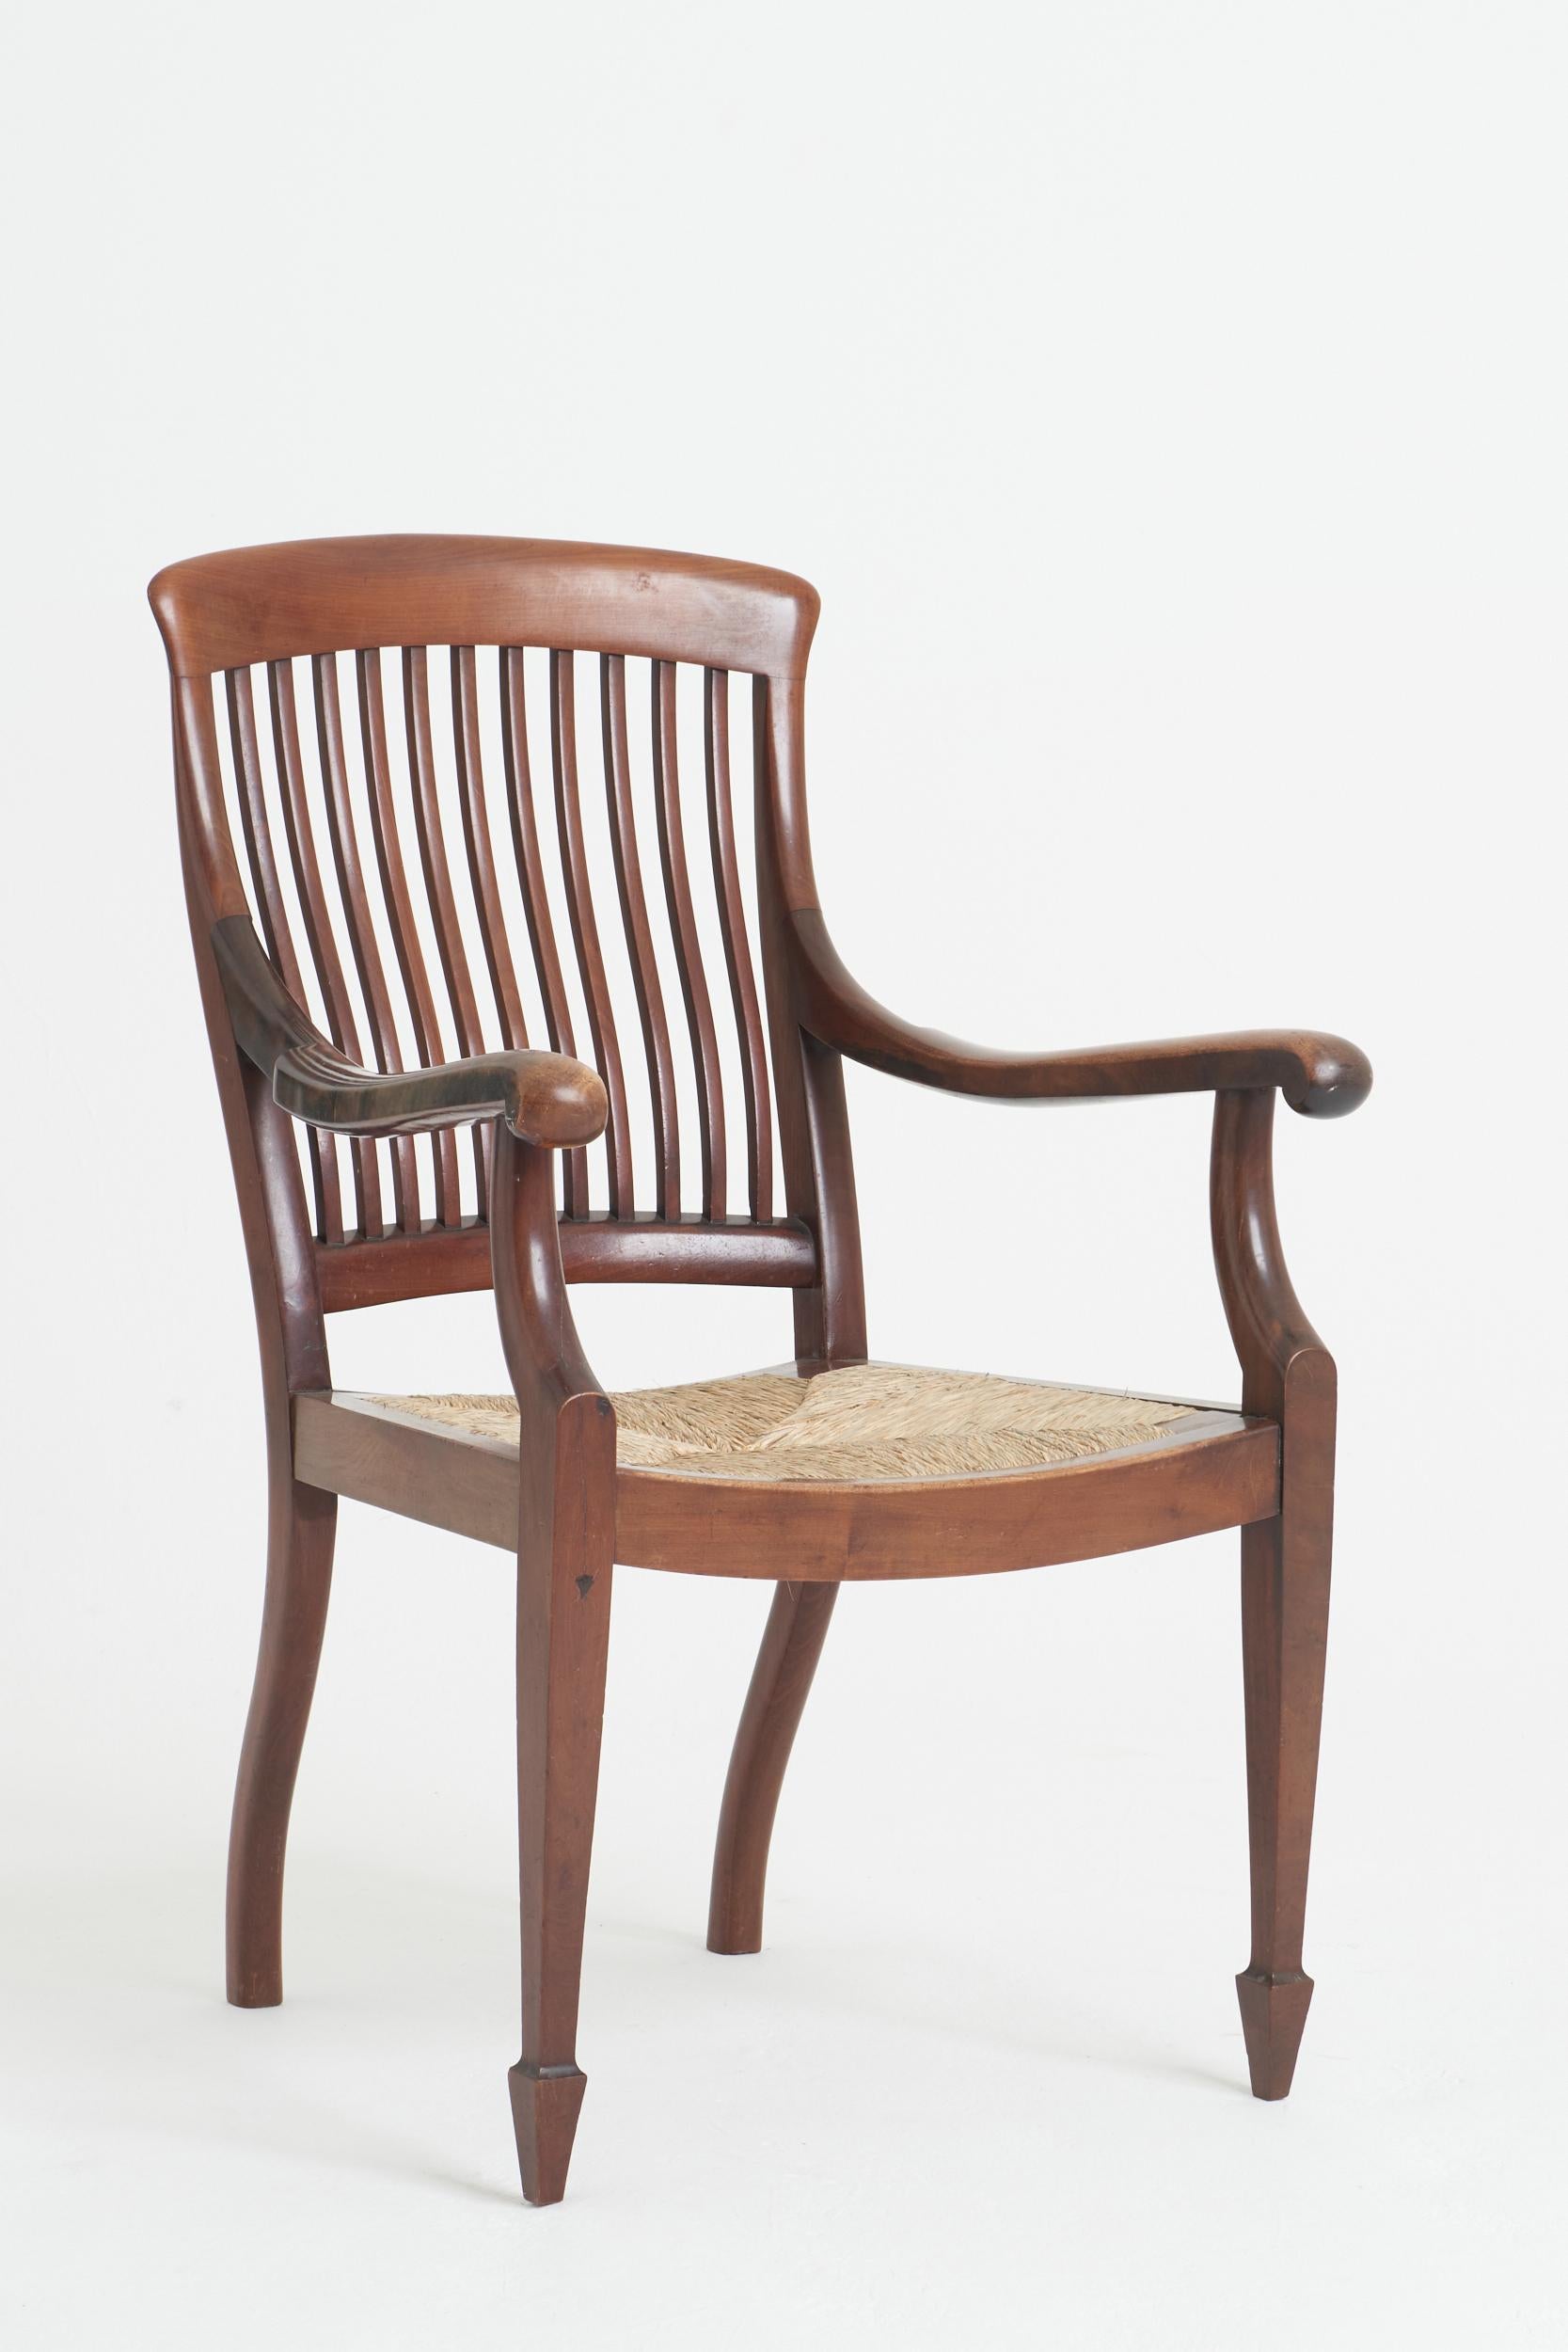 A mahogany and rush armchair.
Back leg stamped with HH initials. 
England, 19th century
98 cm high by 62 cm wide by 66 cm depth, seat height 42 cm.